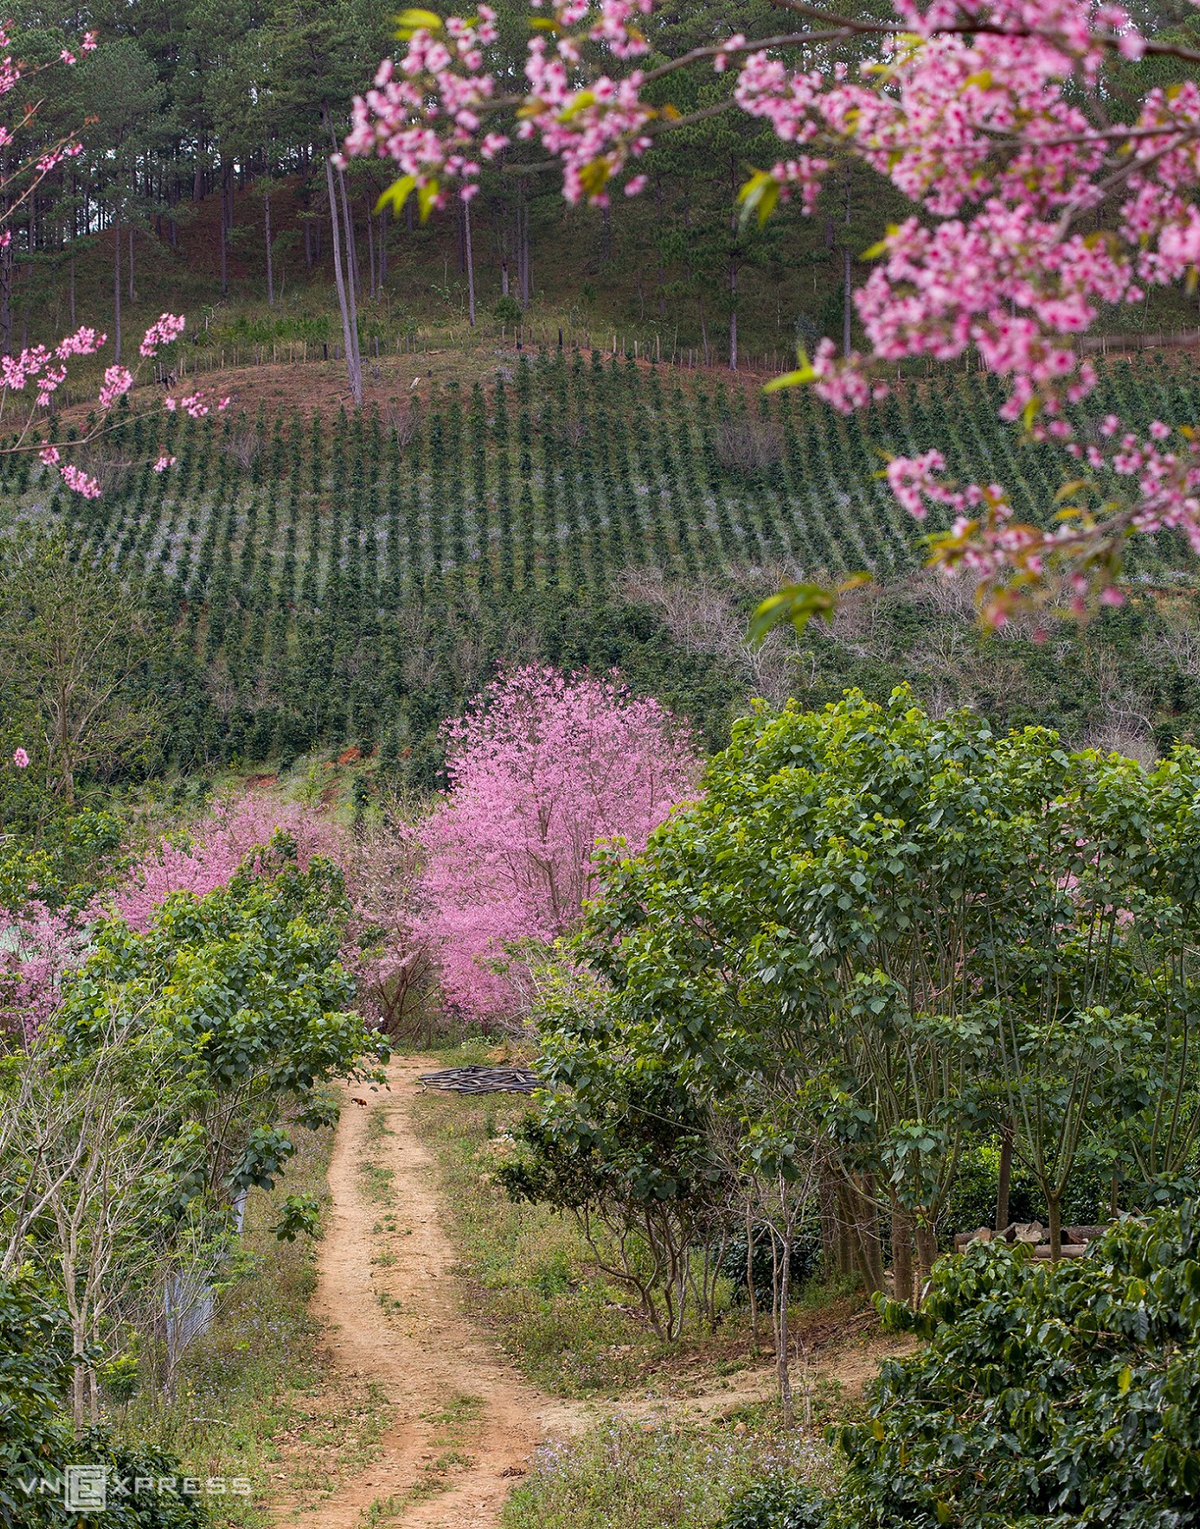 Da Lat blanketed in pink of blooming cherry blossoms